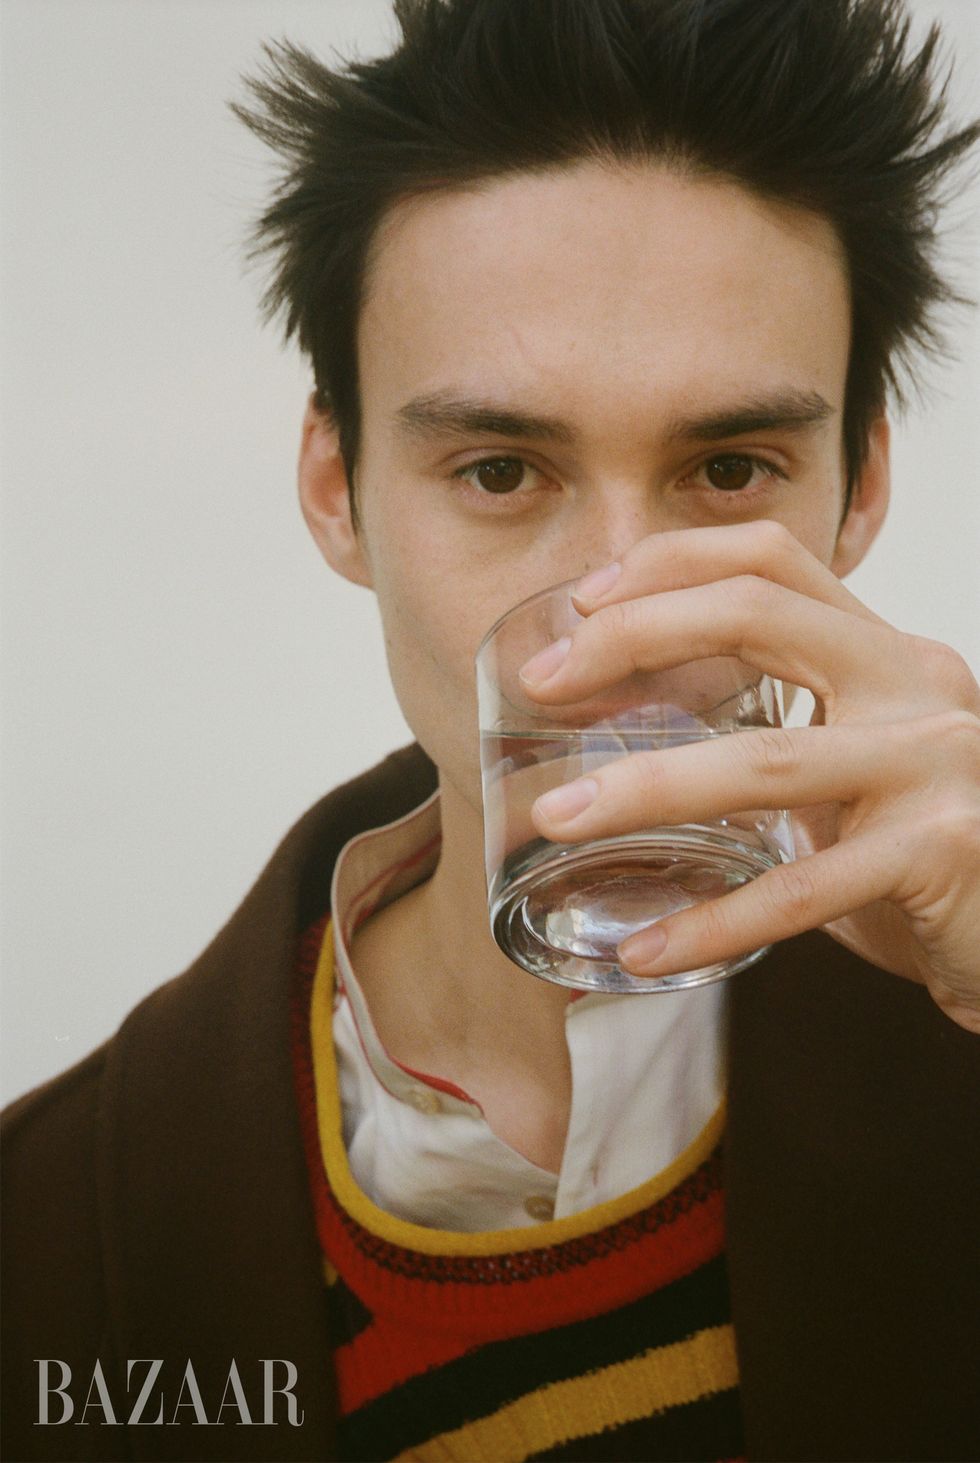 jacob collier drinks from a glass of water while staring directly at the camera